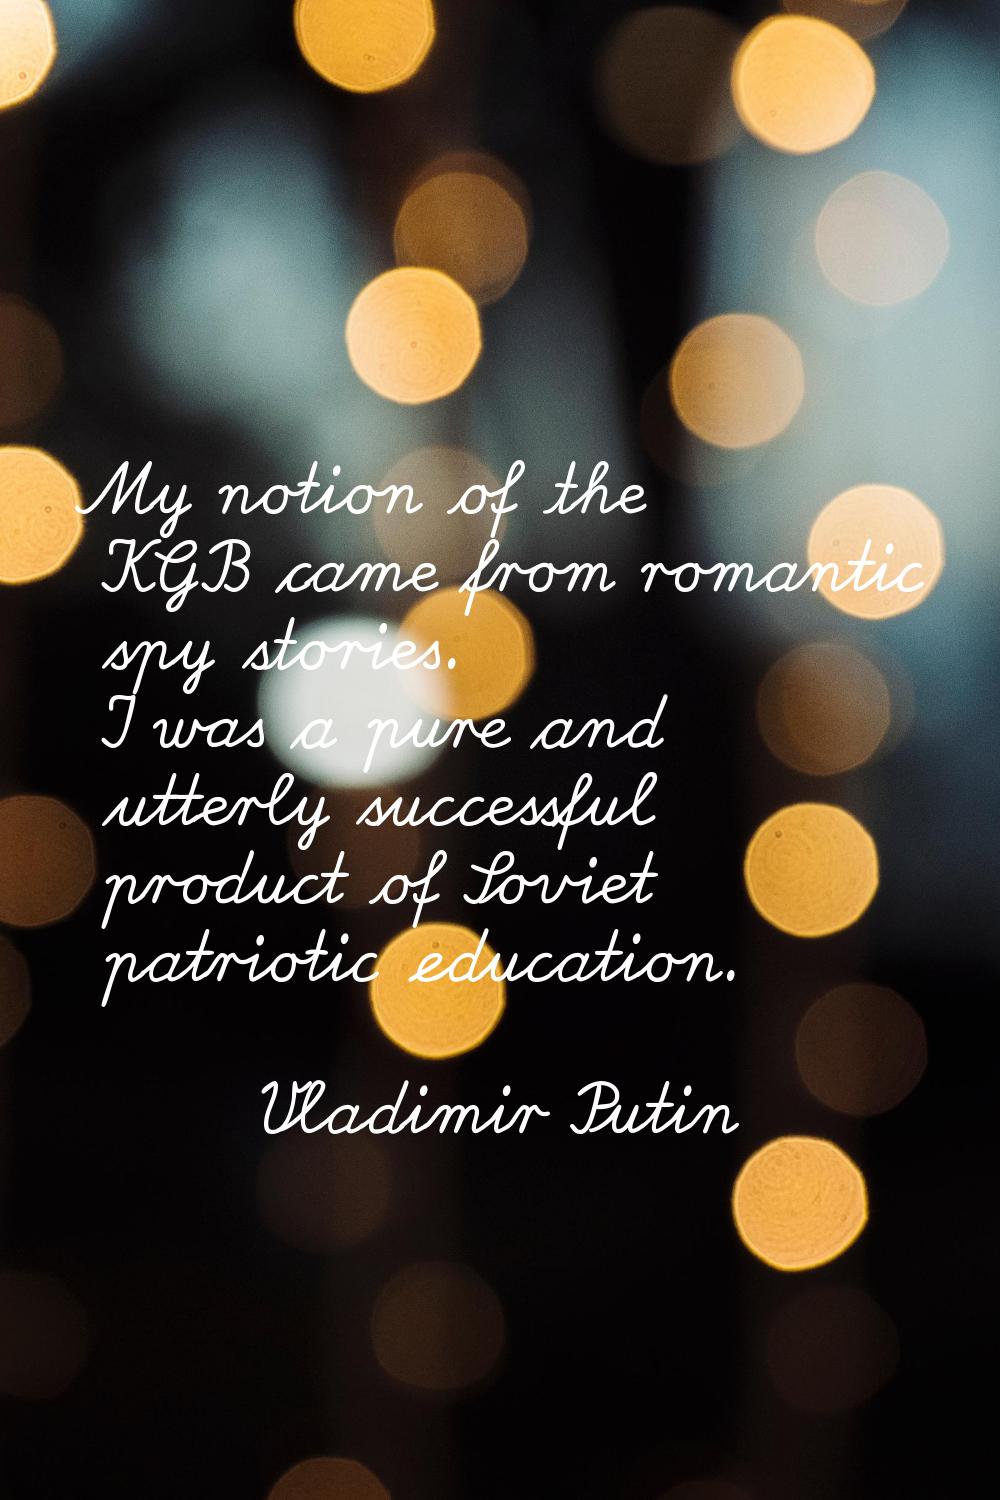 My notion of the KGB came from romantic spy stories. I was a pure and utterly successful product of